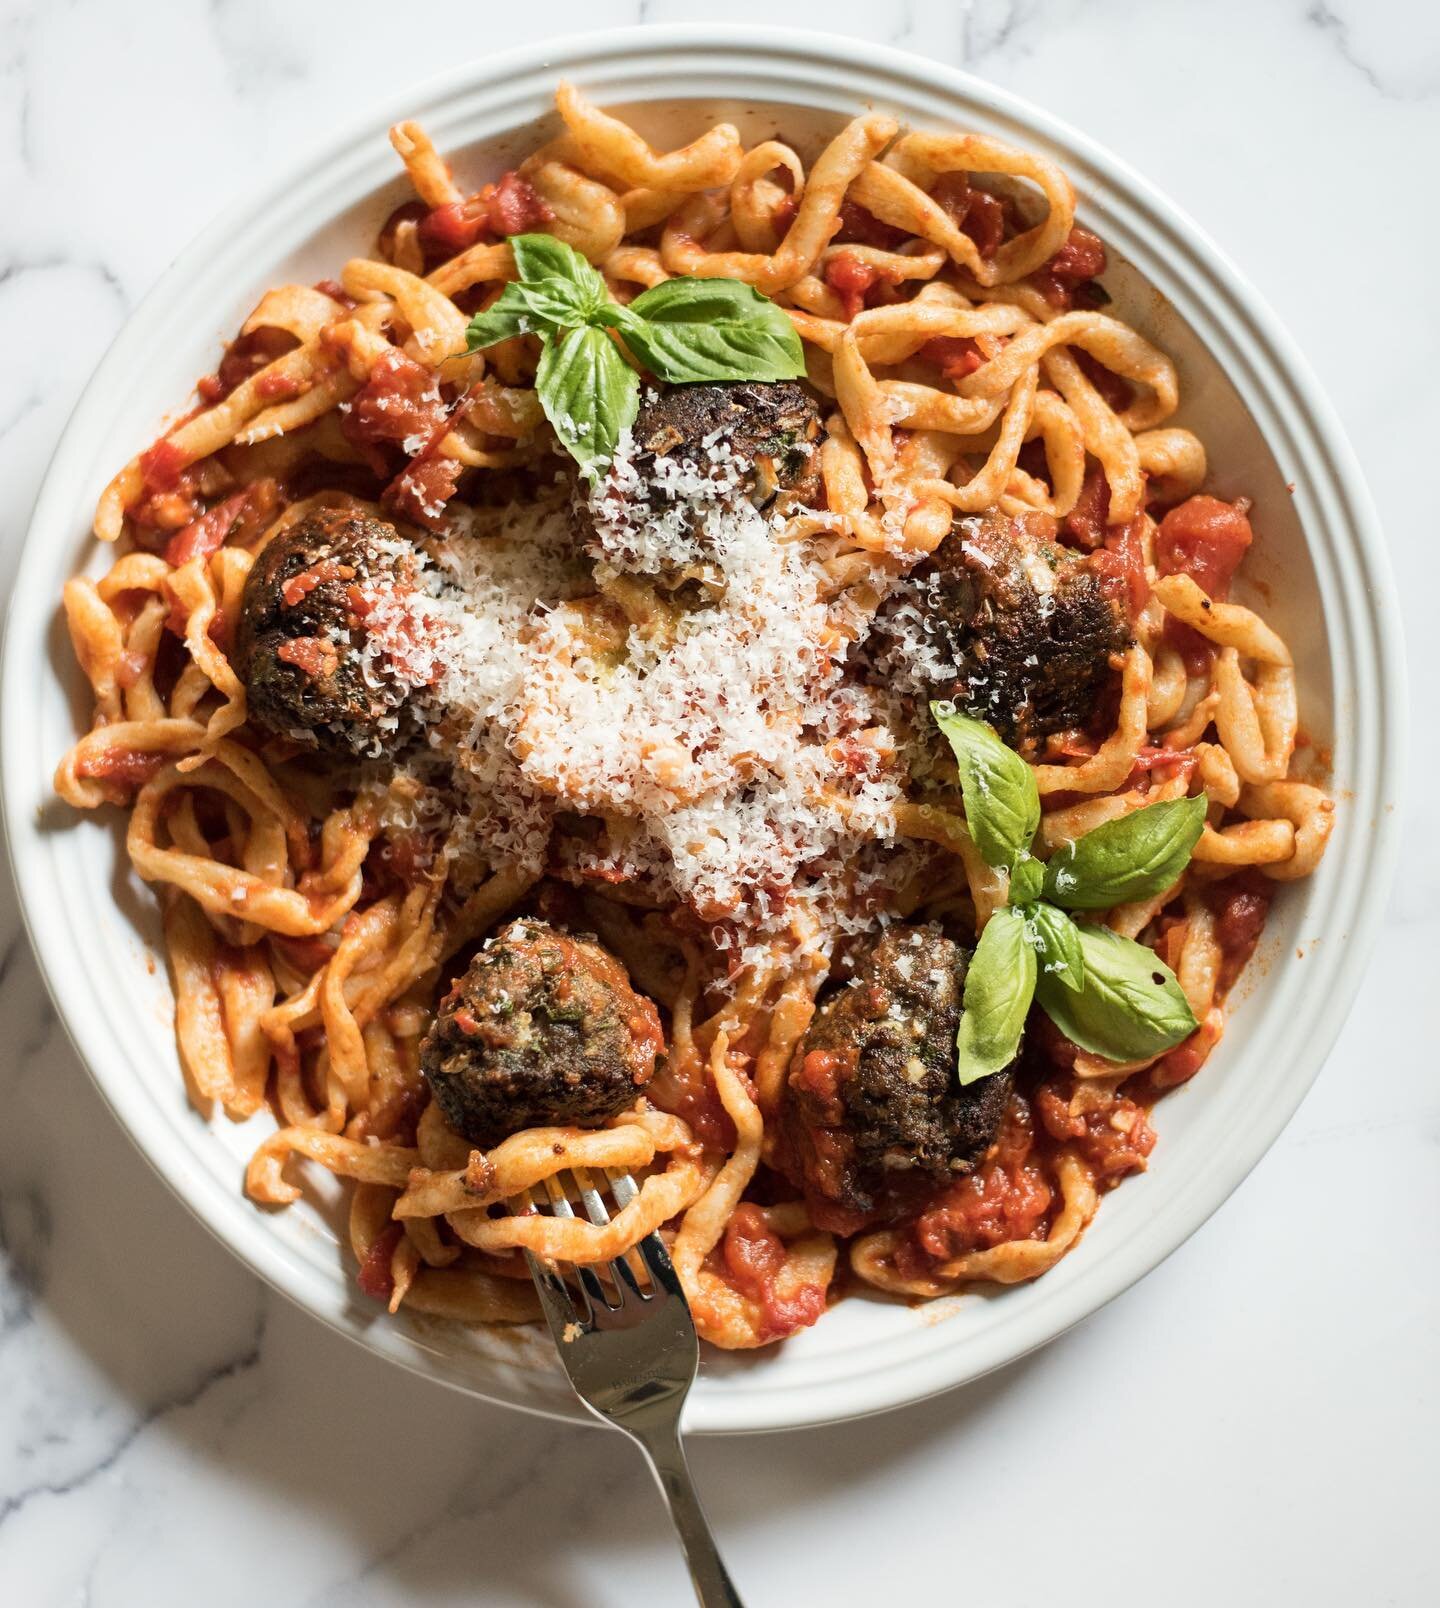 *NEW MENU* Miei amici, get your order in for next week's spaghetti &amp; meatballs! My take on this quintessential Italian dish features homemade pasta, fresh tomato sauce and ground beef meatballs with parmesan, parsley, and secret spices. A combo t